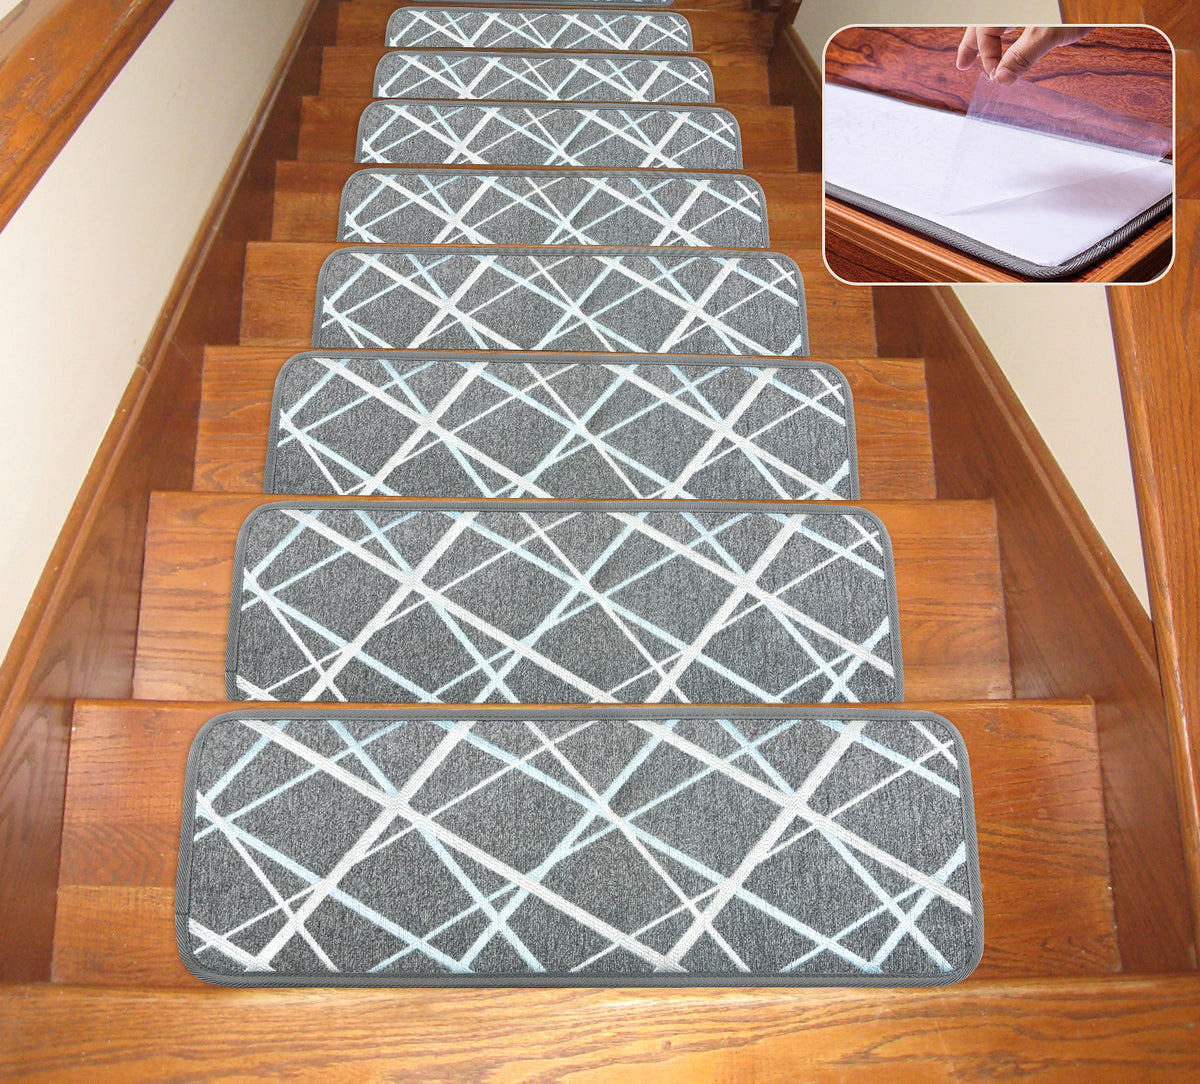 Seloom Durable Kitchen Rug Runners with Non-Slip Rubber Backing and Un